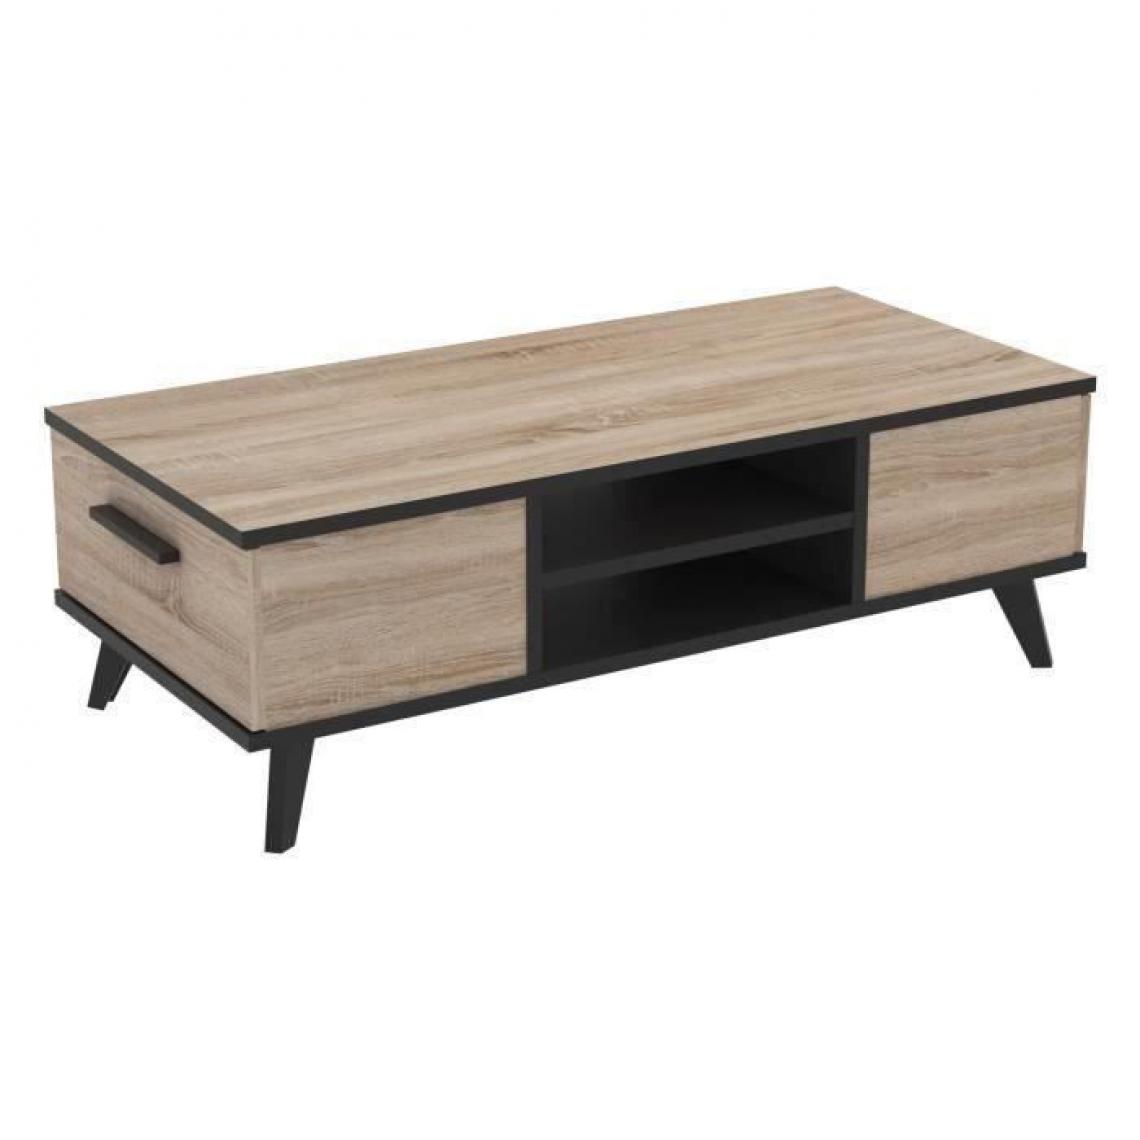 Demeyere - Table basse Bruce 2 tiroirs 2 niches - Tables basses